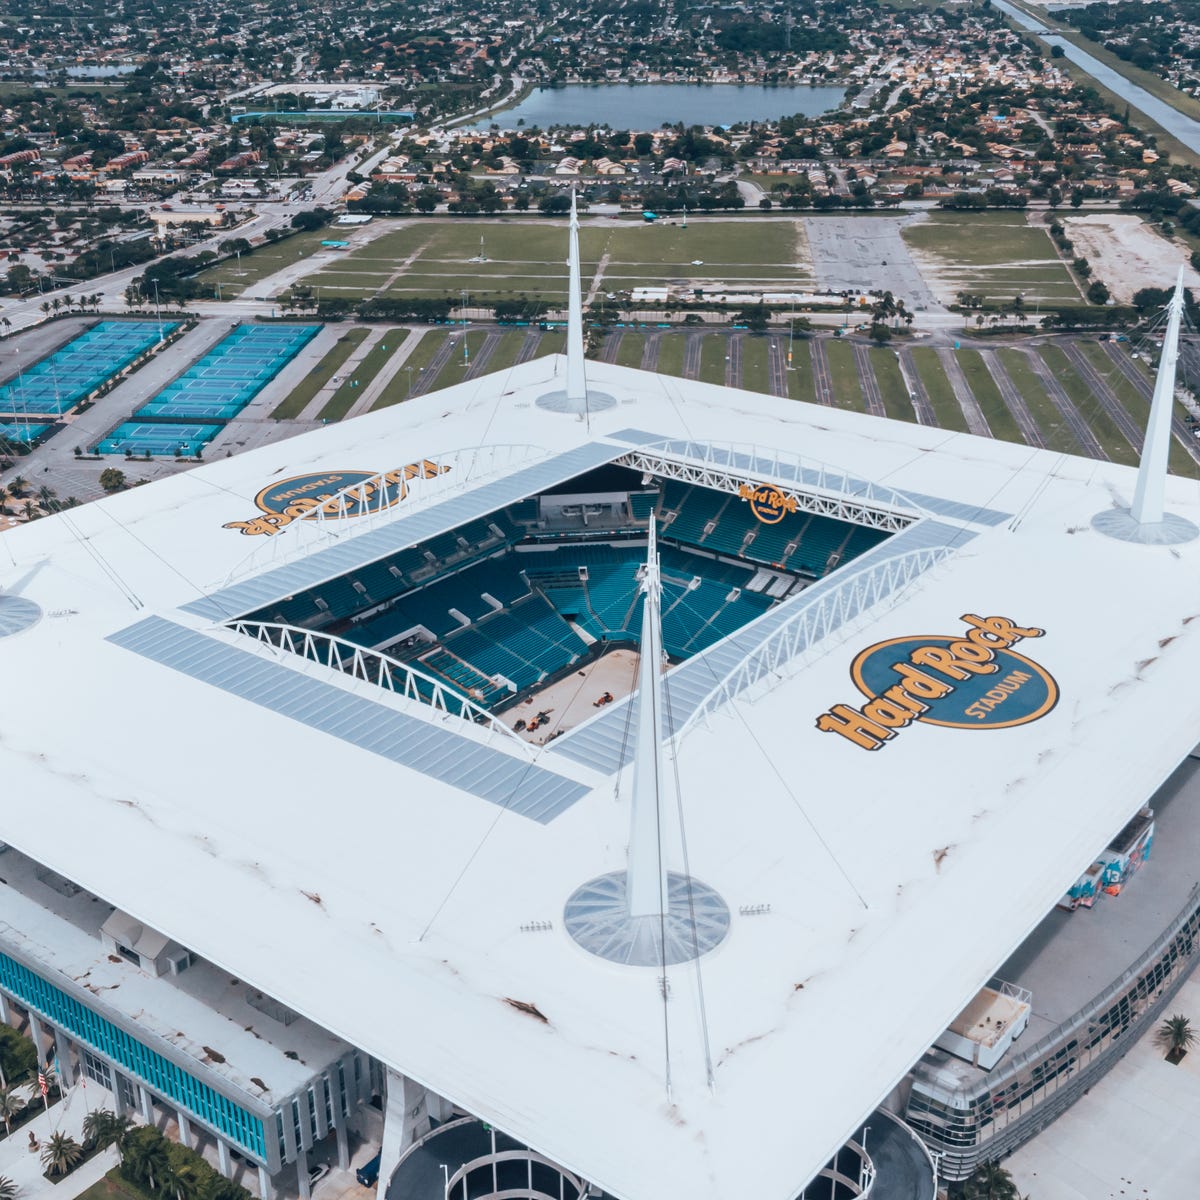 Miami Dolphins and Dell partner for Hard Rock Stadium IT deal